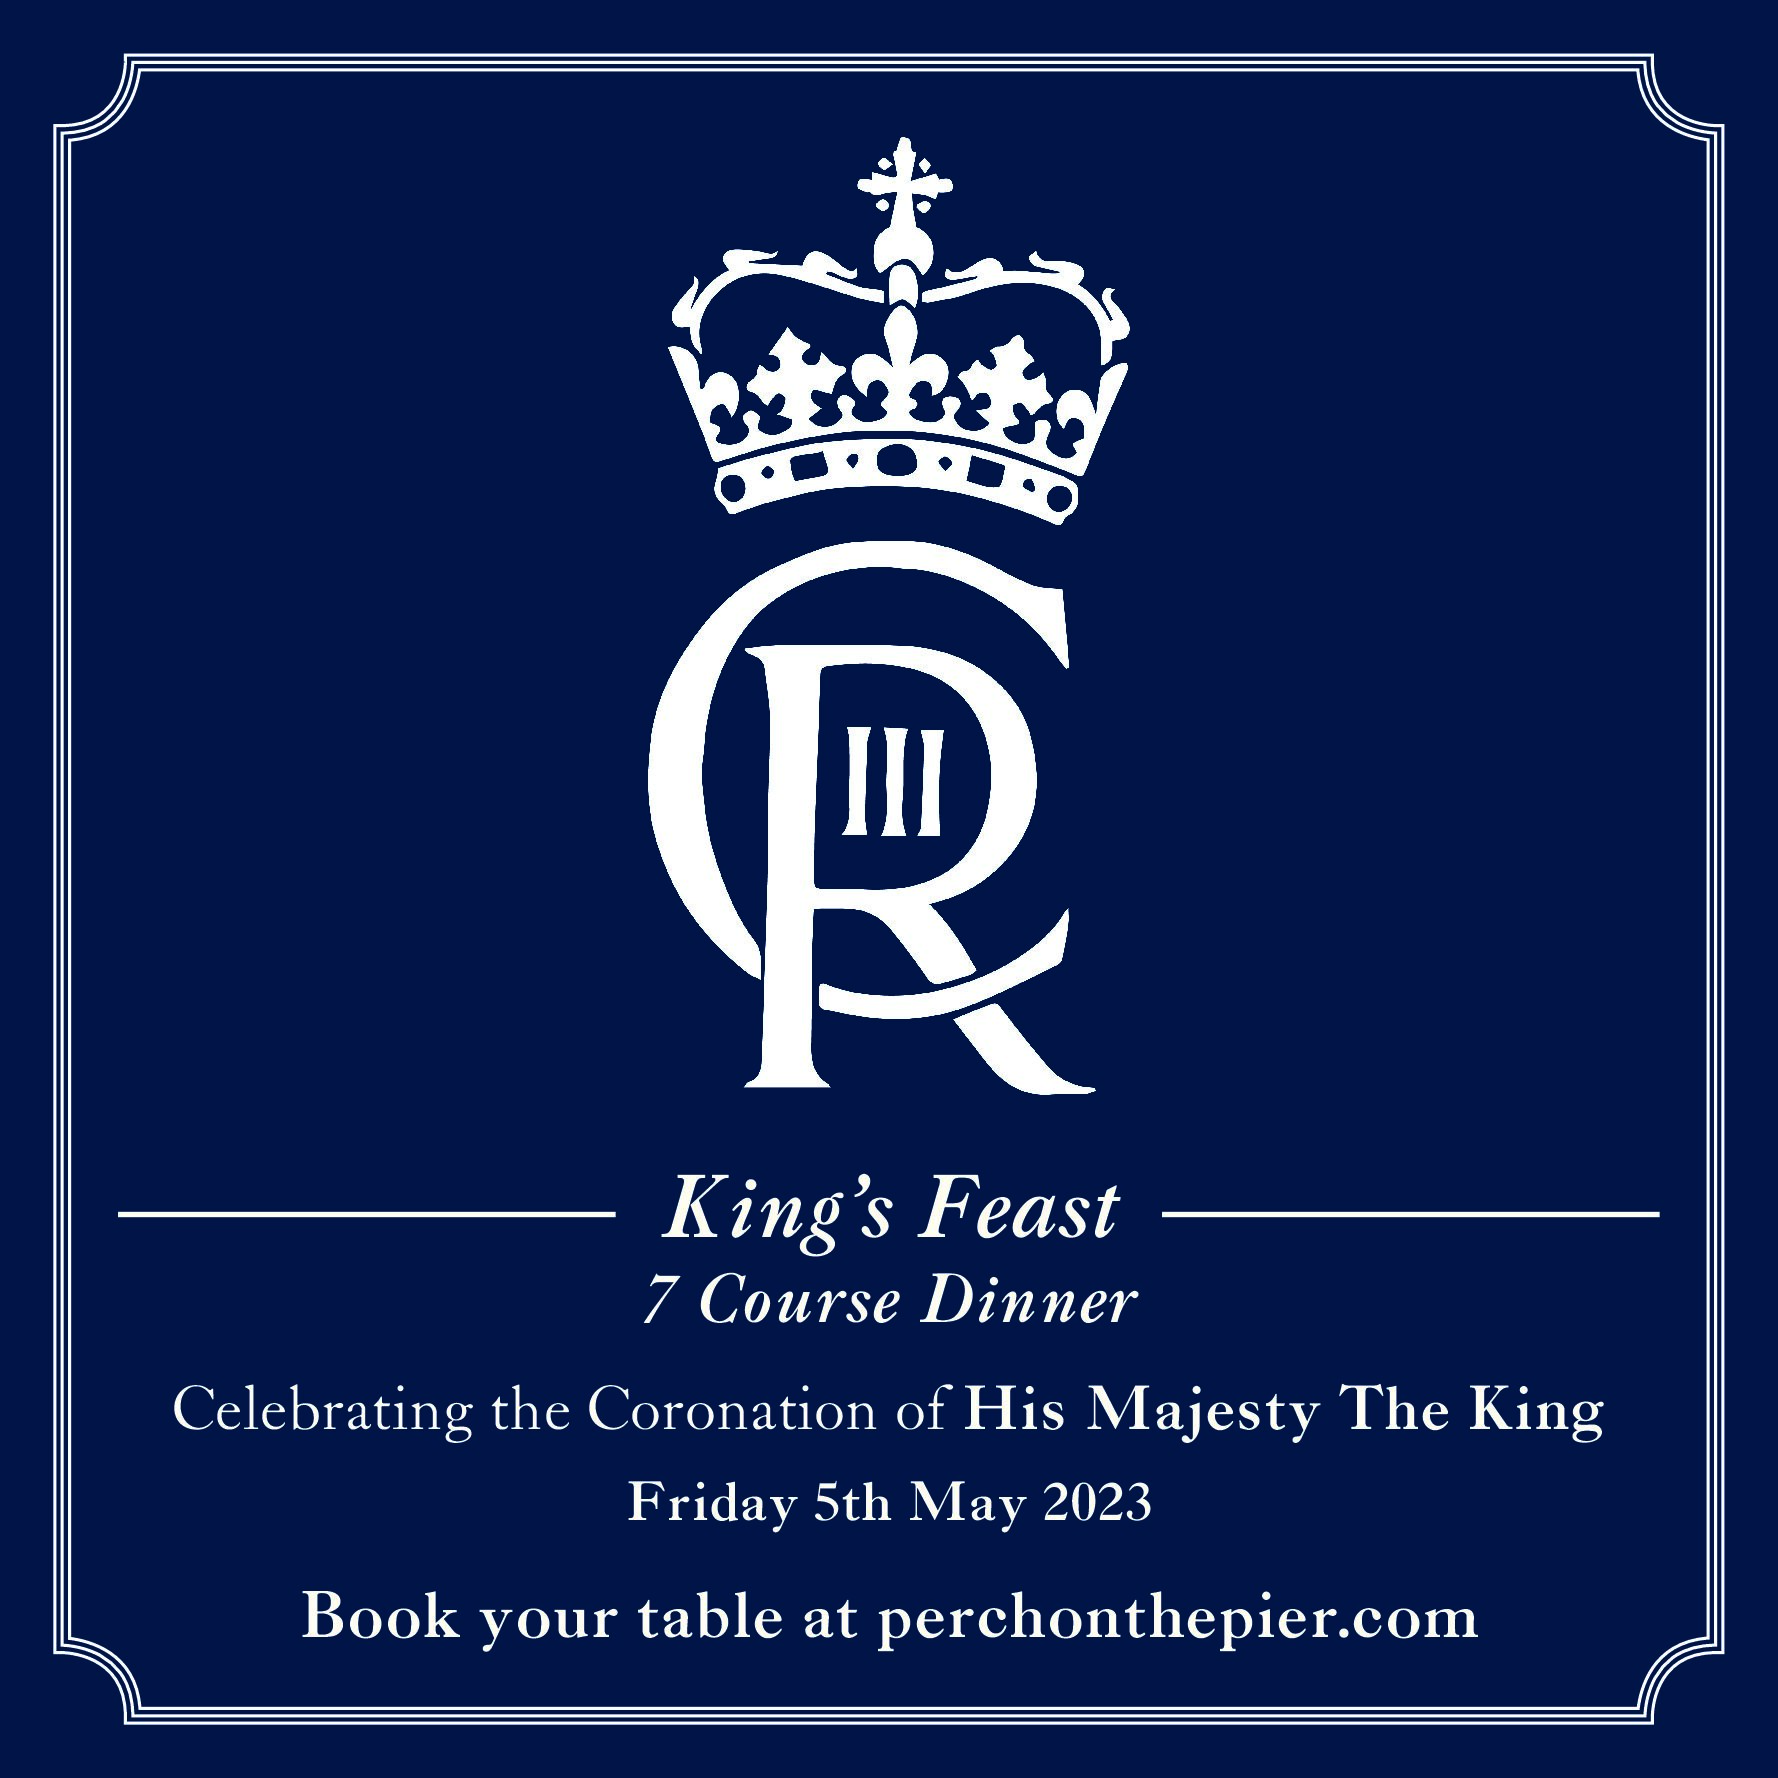 Kings Feast at Perch on the Pier celebrating Kings Charles Coronation